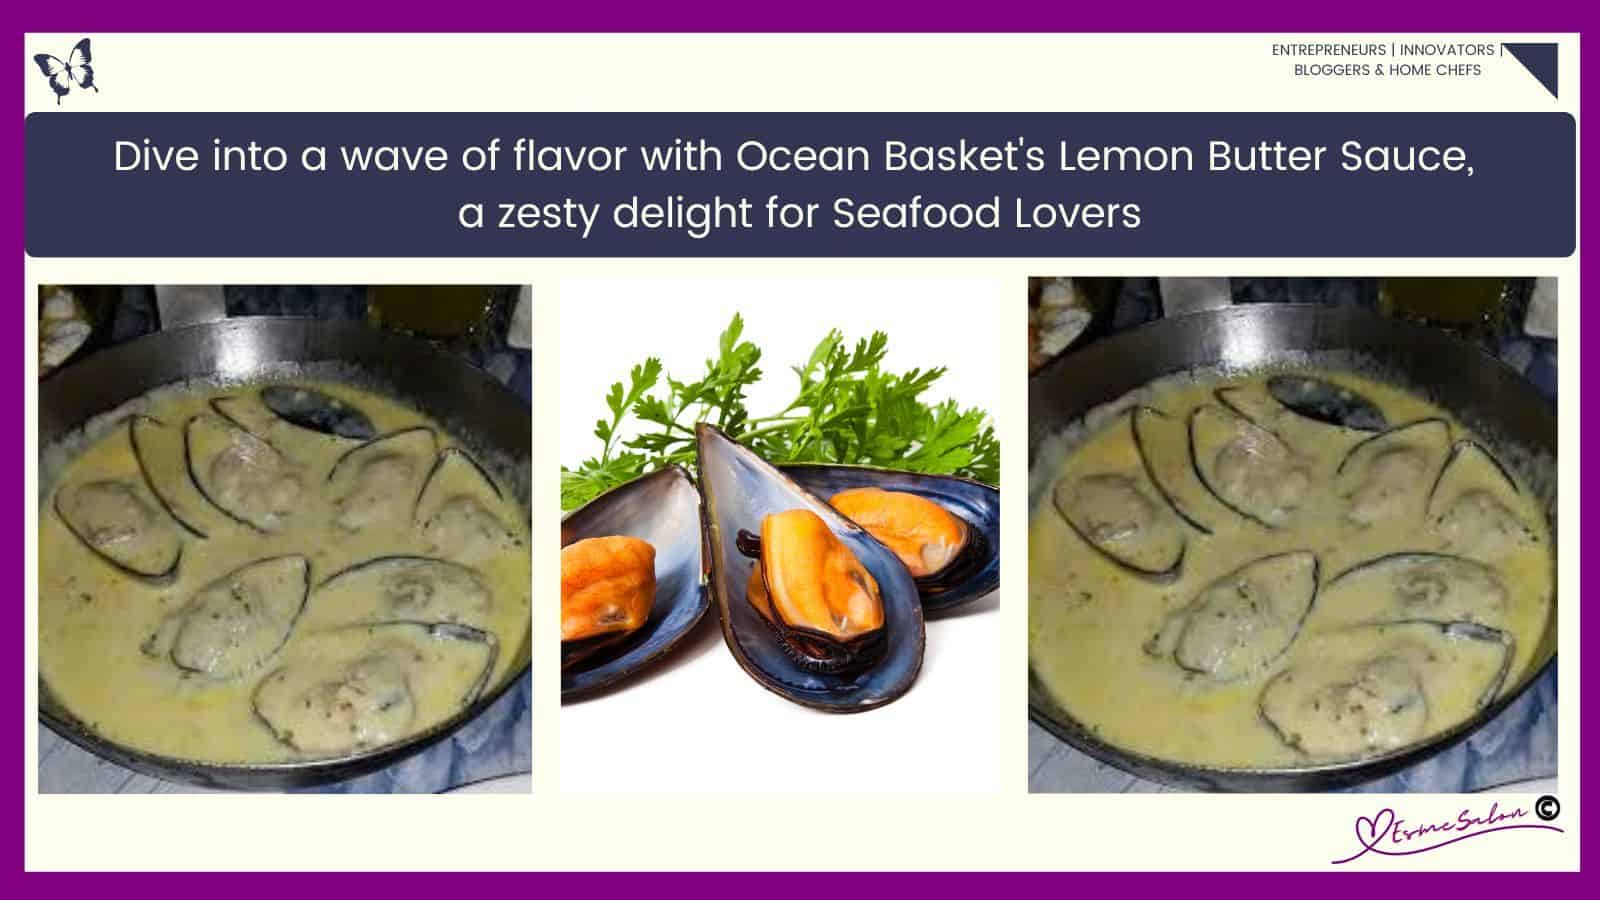 an image of a black cast iron pan with mussels in Ocean Basket's Lemon Butter Sauce